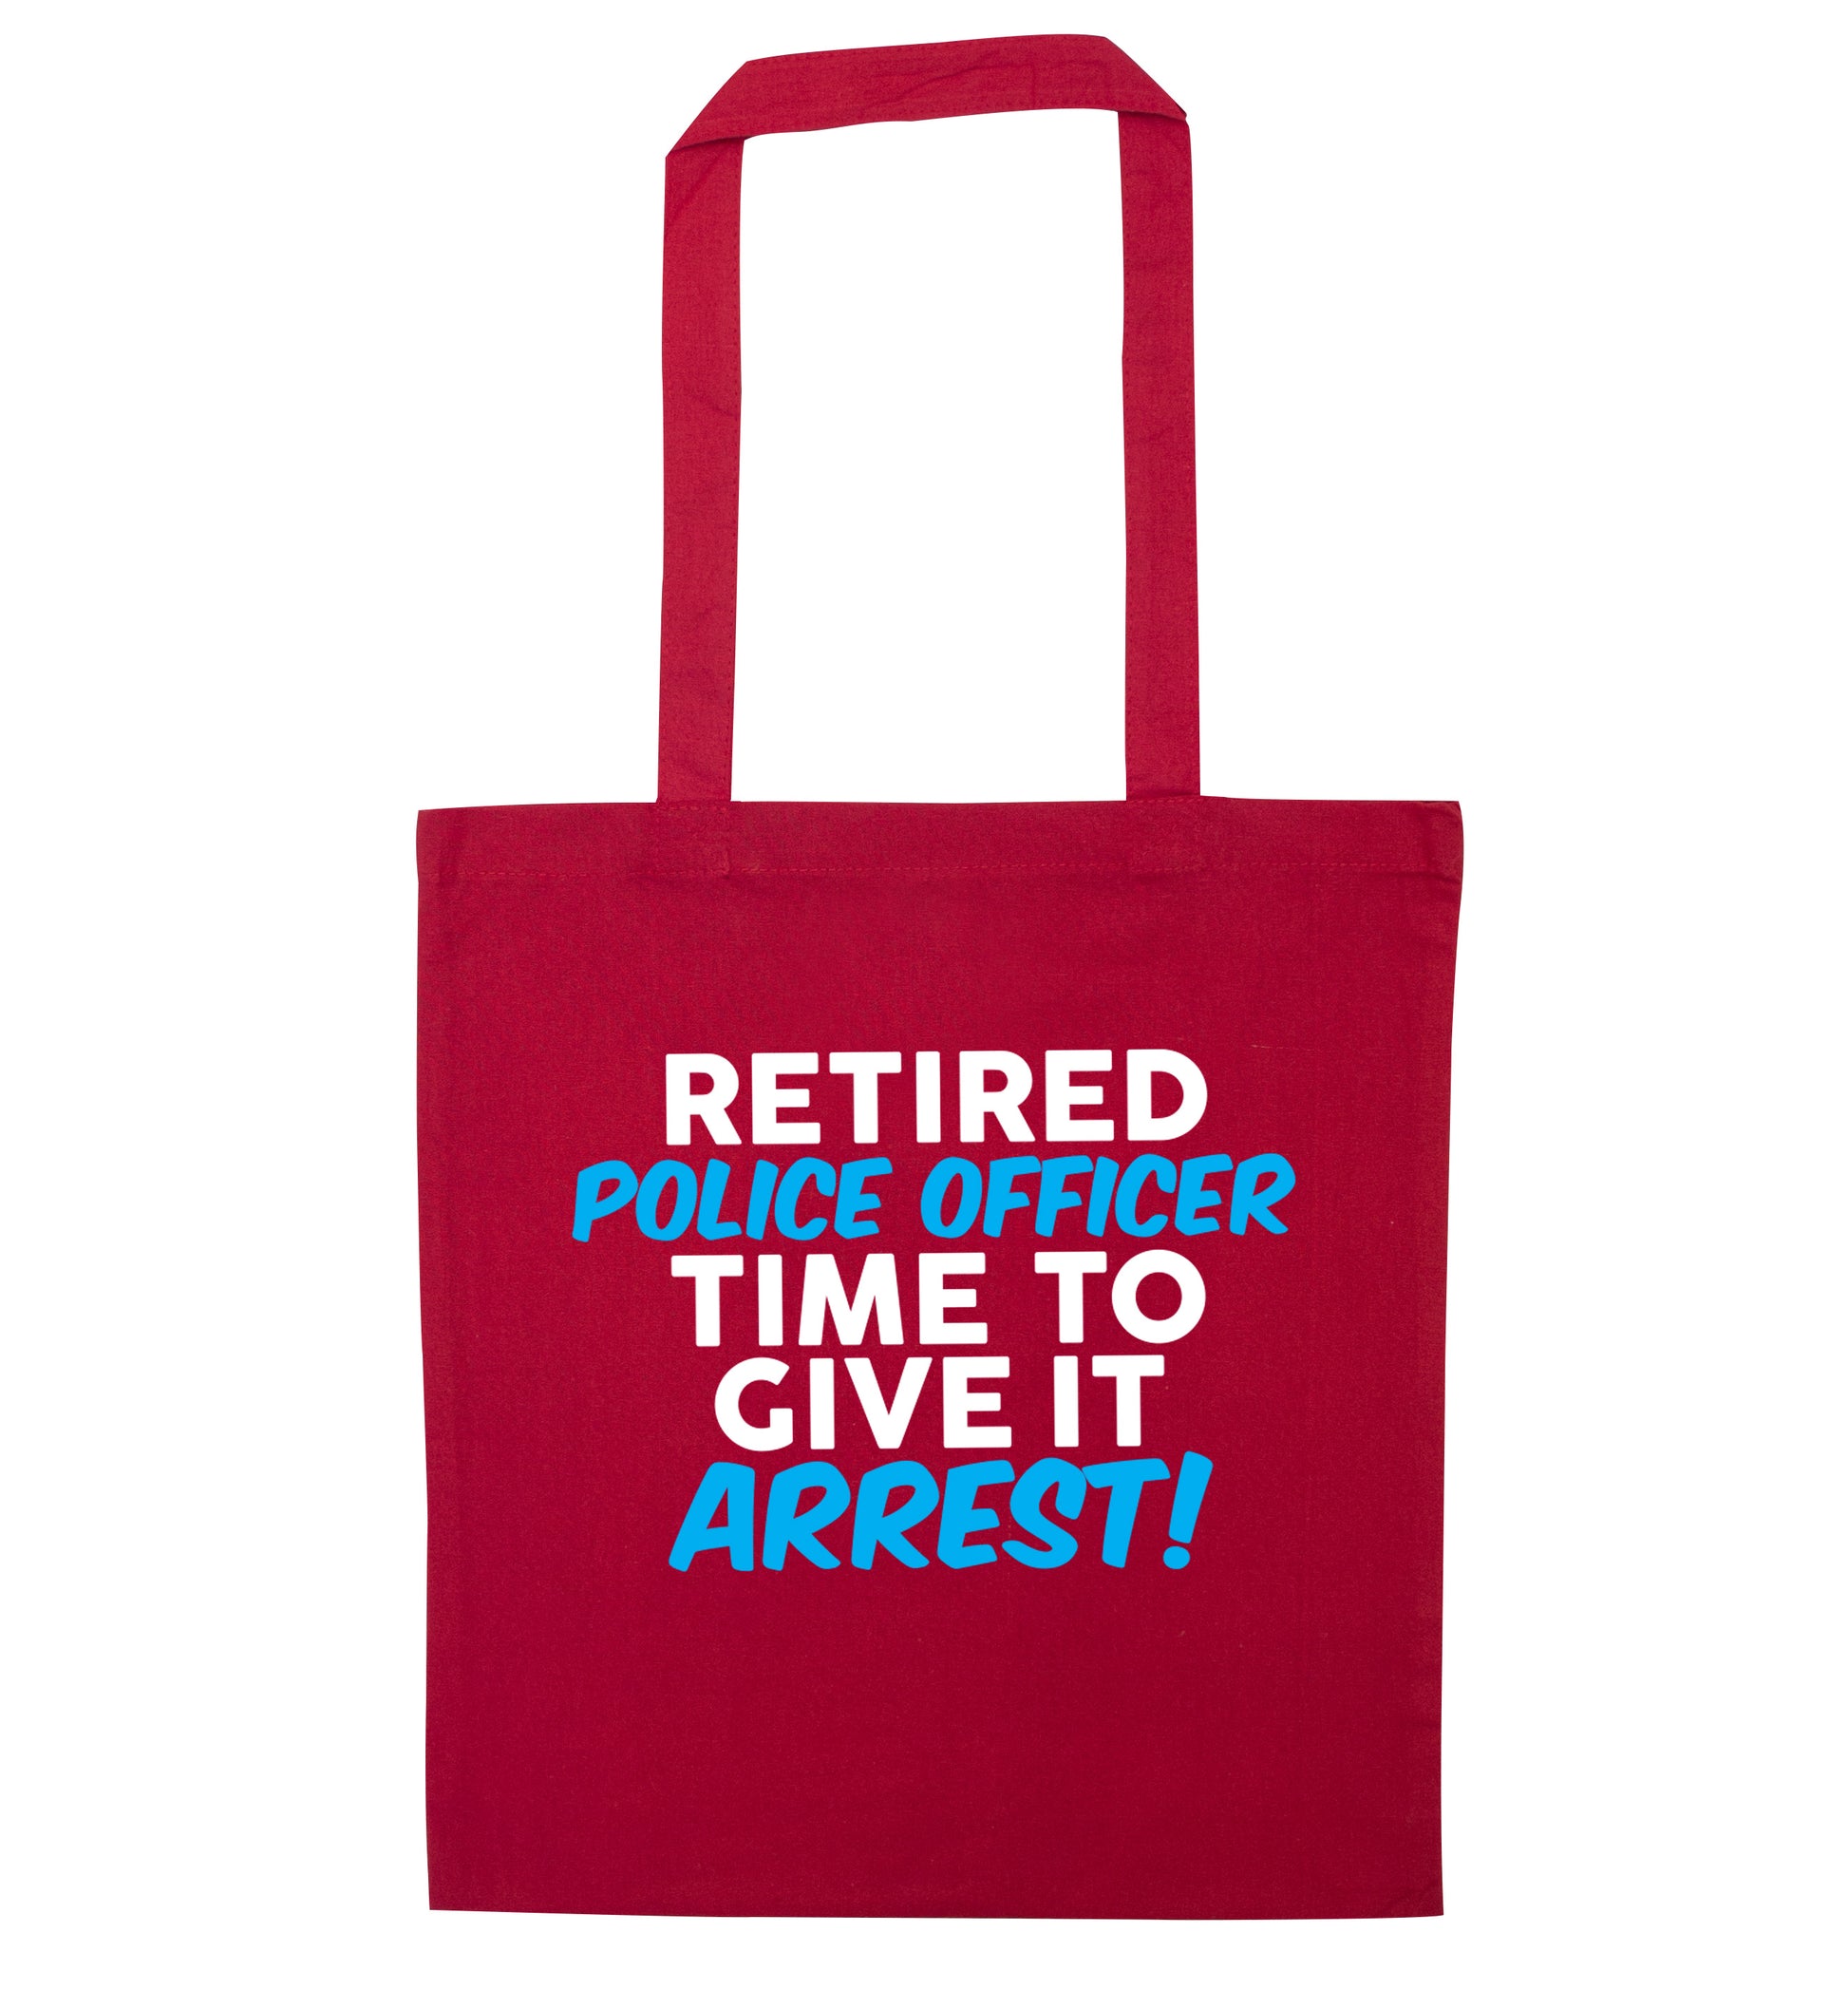 Retired police officer time to give it arrest red tote bag